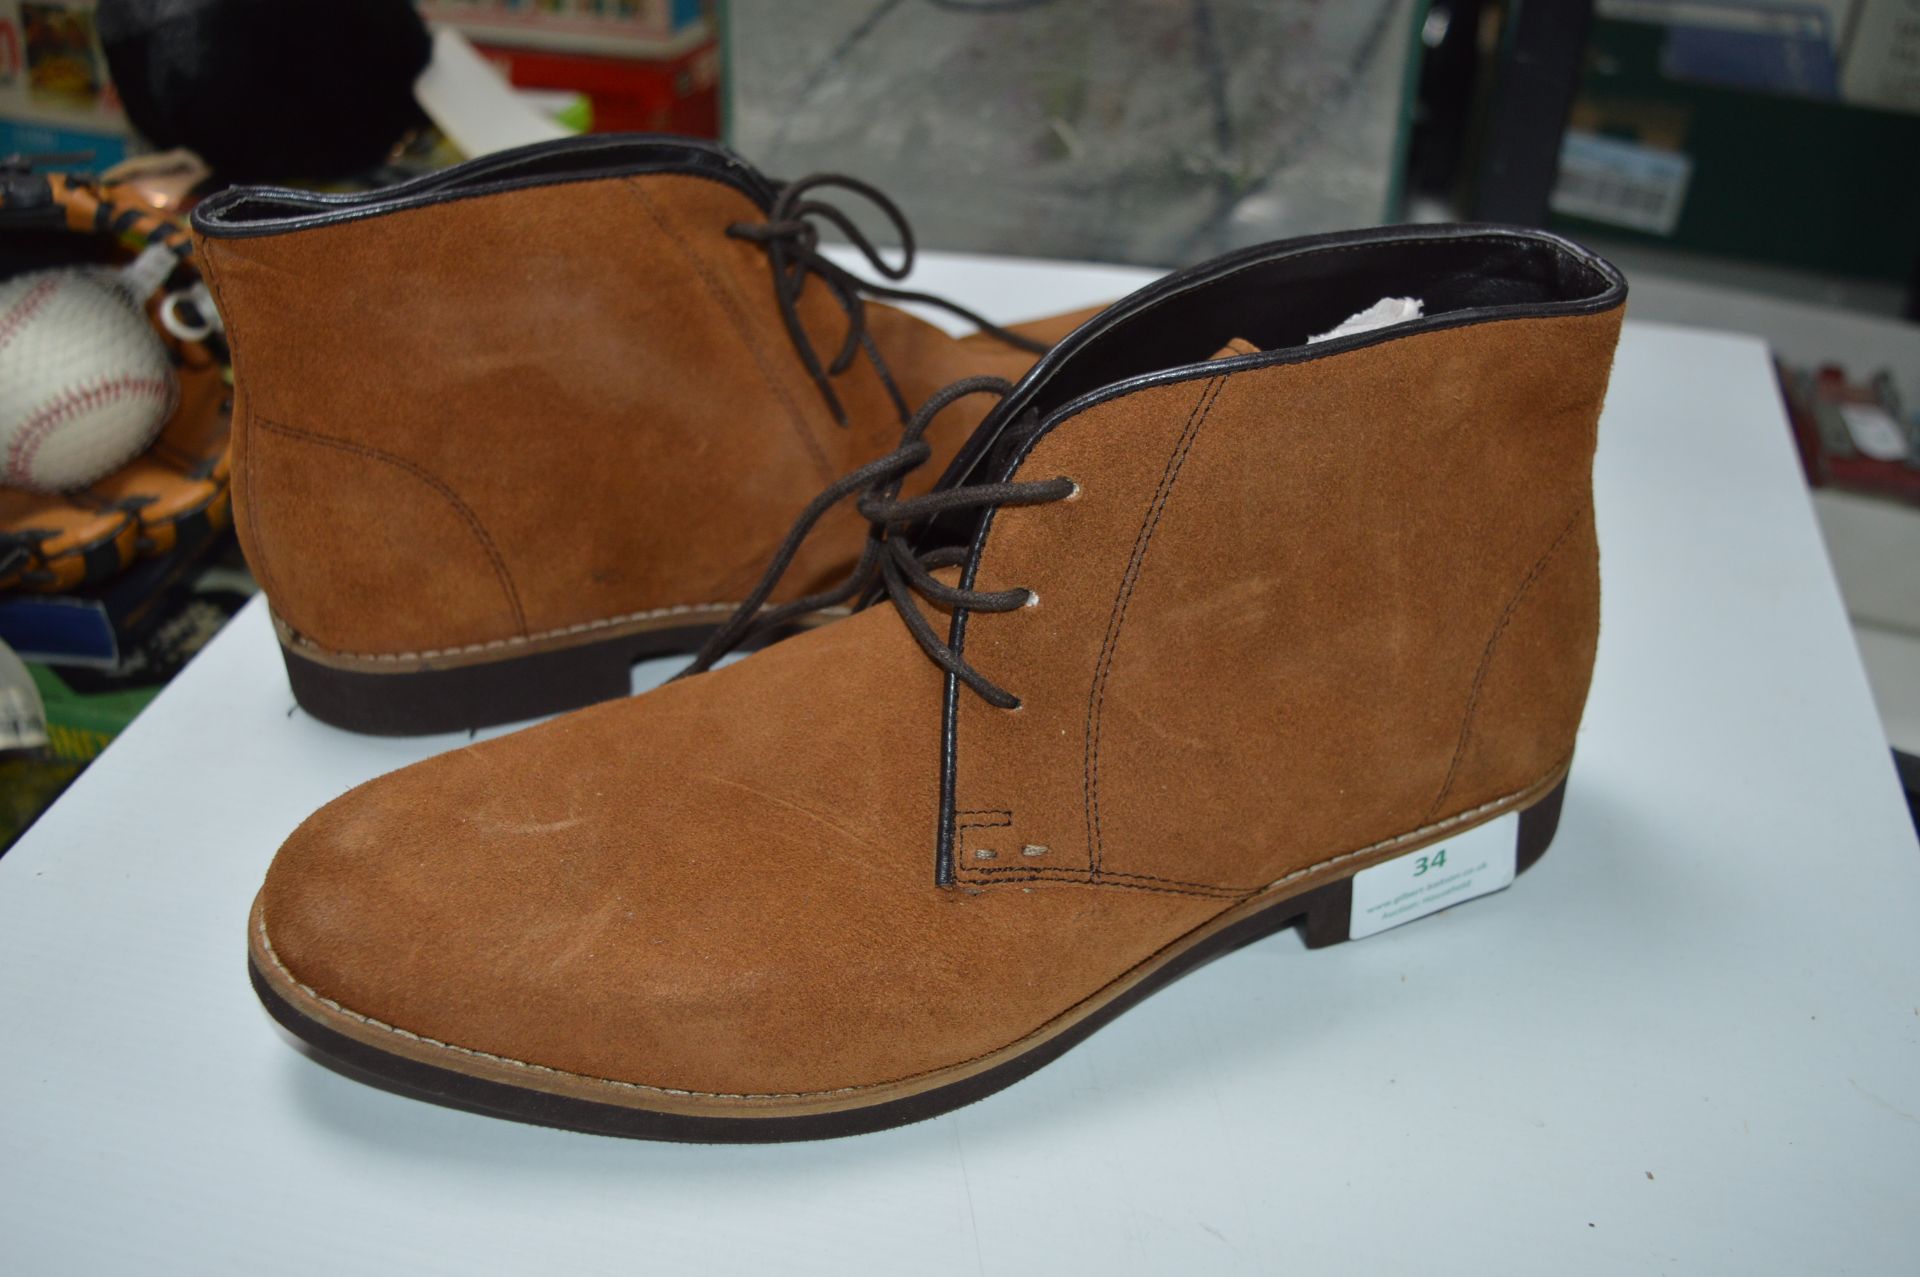 Size: 7 Tan Suede Ankle Boots